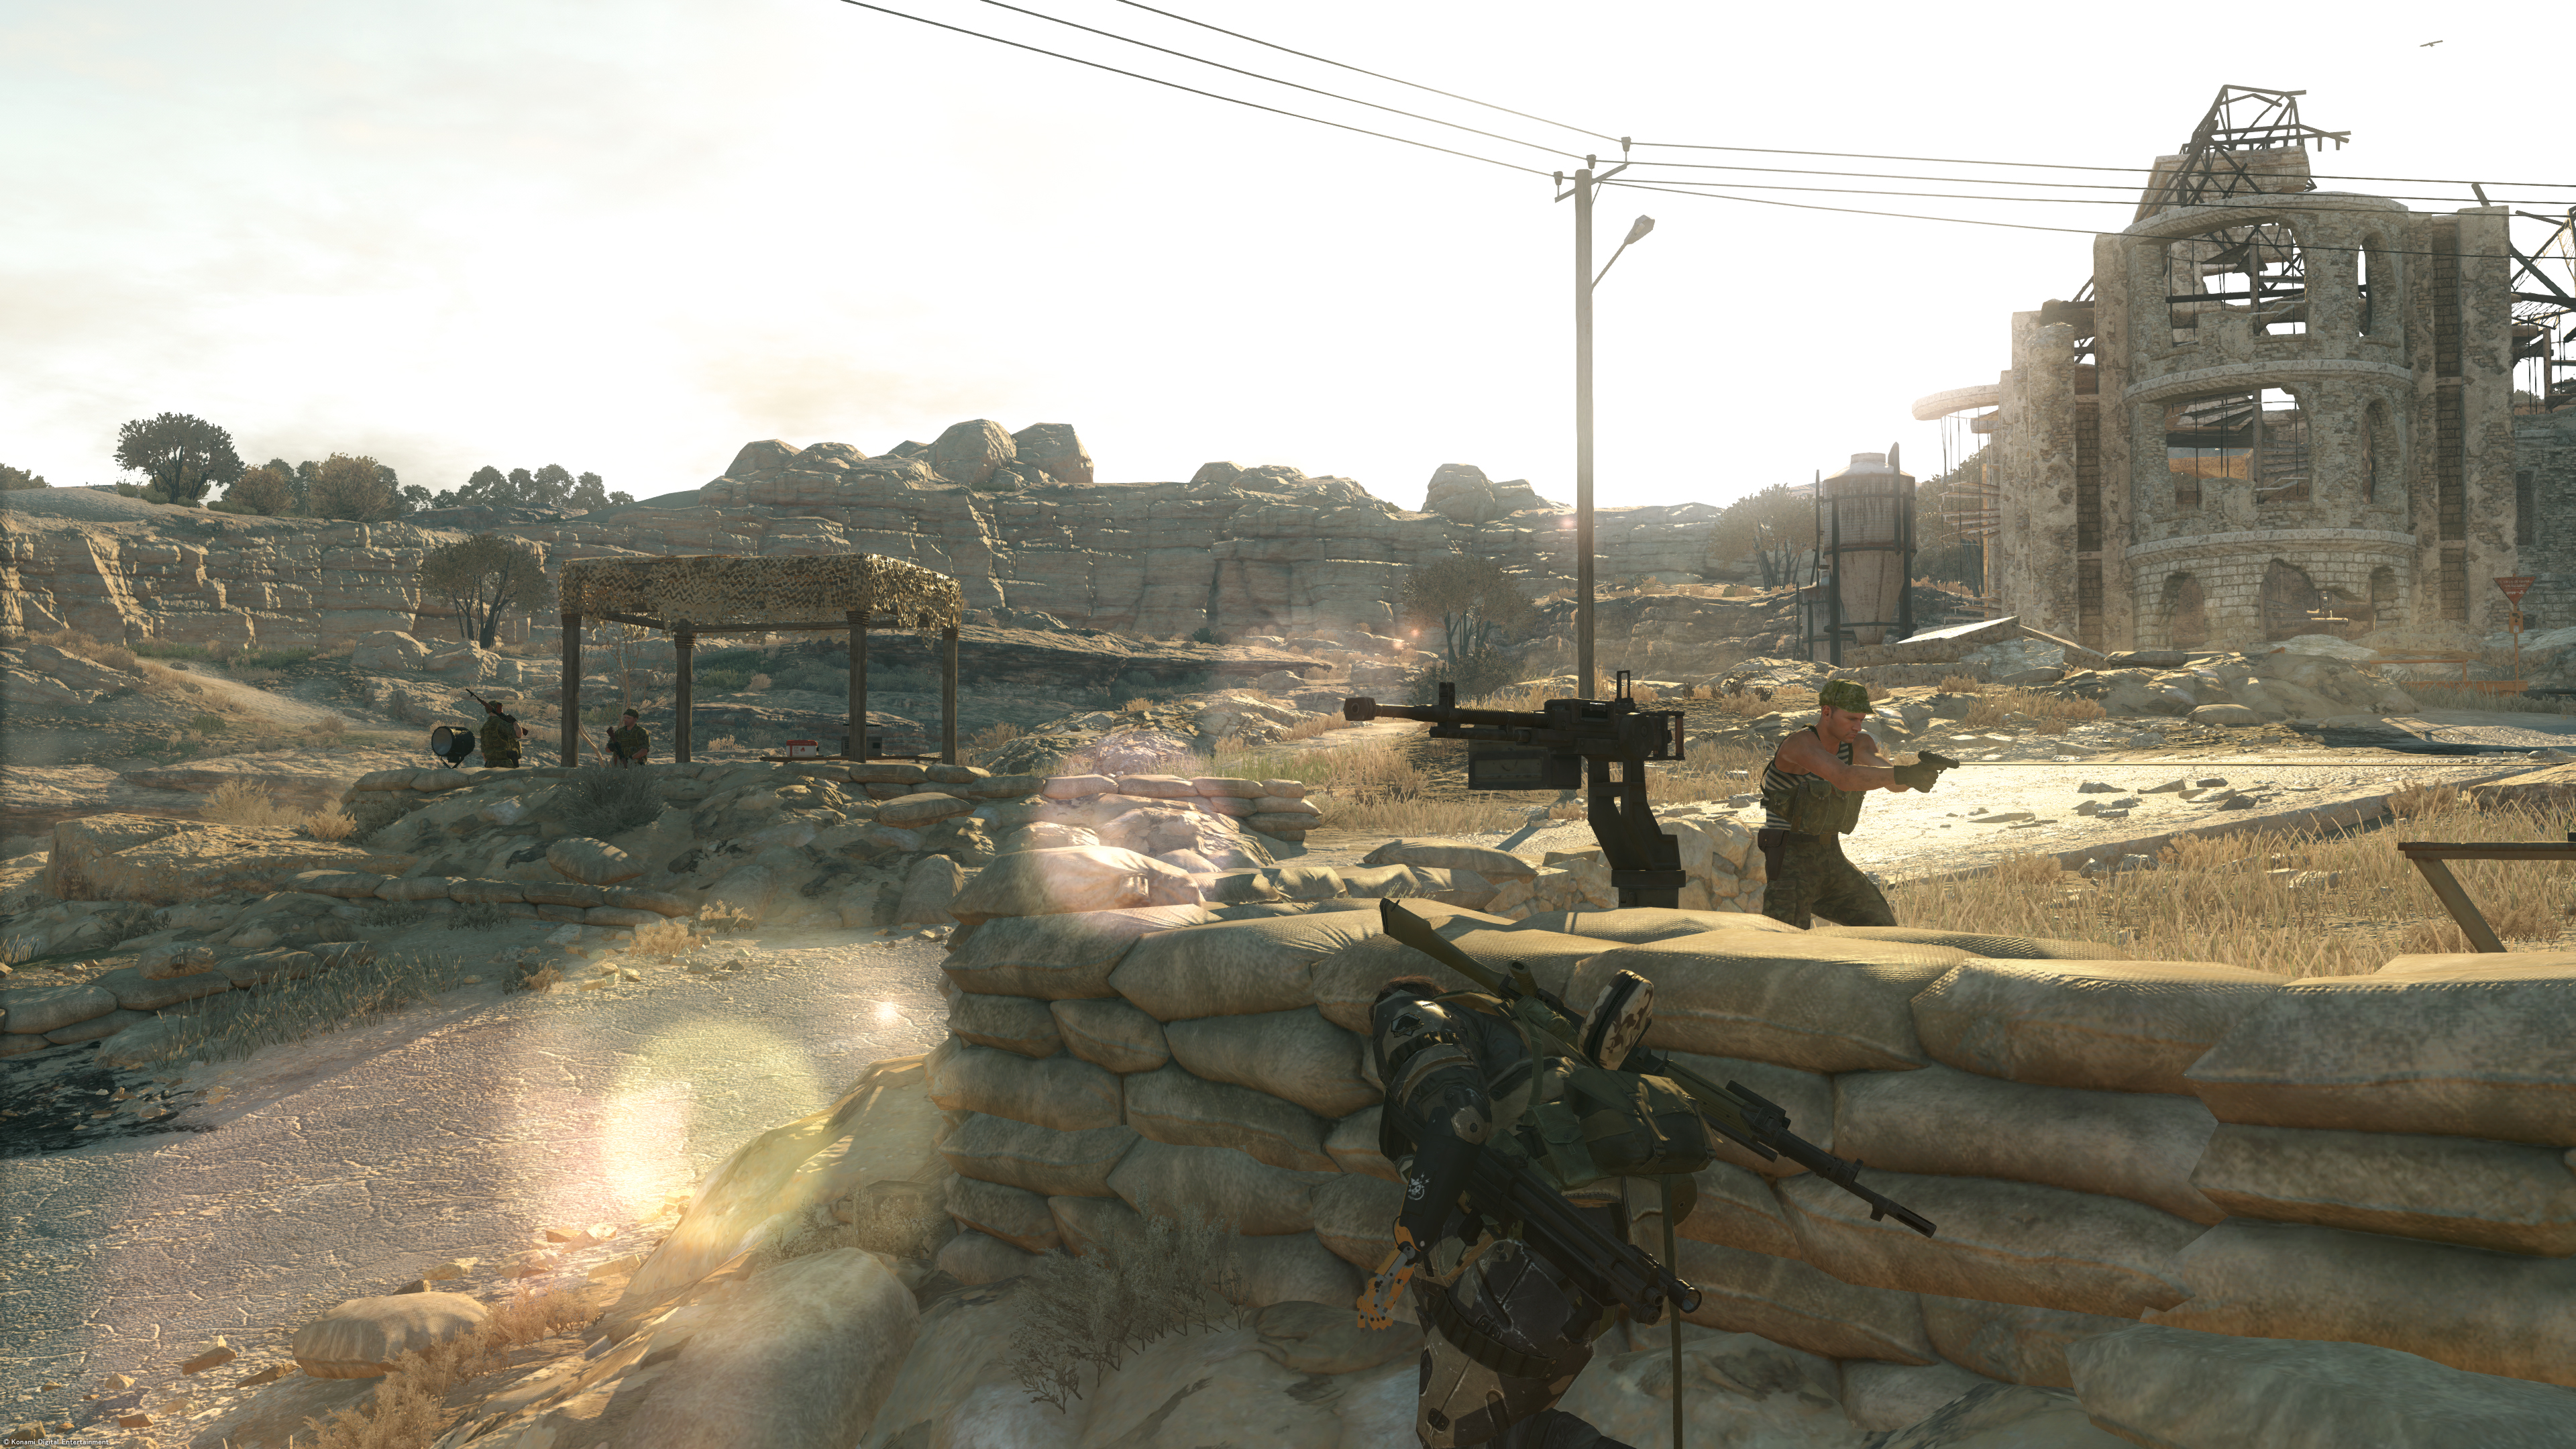 Media asset in full size related to 3dfxzone.it news item entitled as follows: Risoluzioni e frame rate di Metal Gear Solid V: The Phantom Pain | Image Name: news22949_Metal-Gear-Solid-V-The-Phantom-Pain_2.jpg